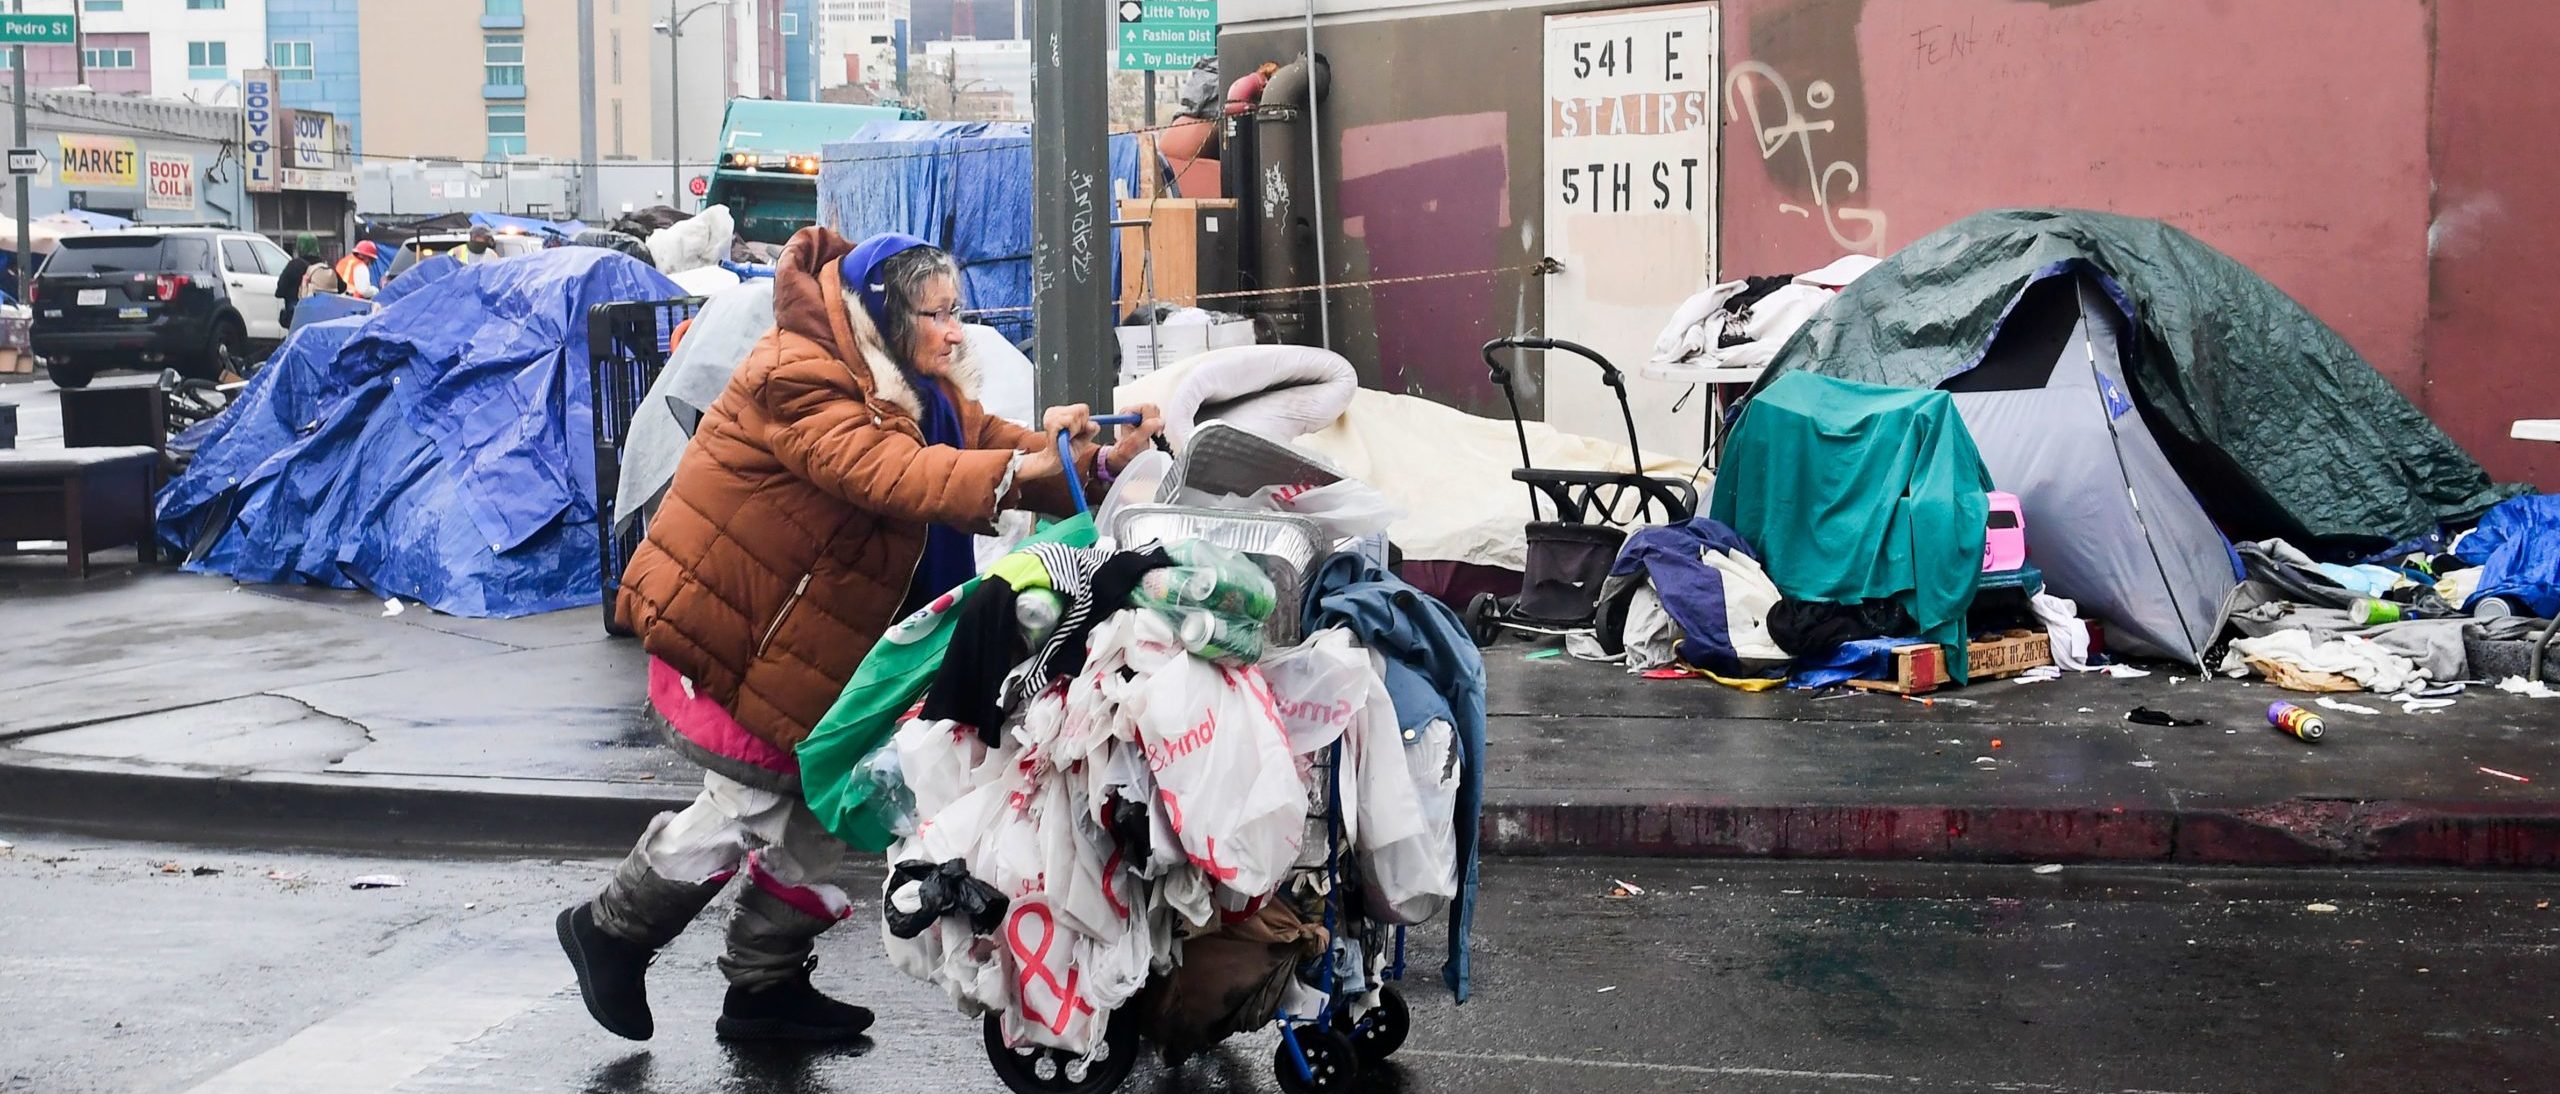 A homeless woman pushes her belongings past a row of tents on the streets of Los Angeles, California on February 1, 2021. - The federal judge overseeing attempts to resolve the homeless situation has called for an urgent meeting to discuss worsening conditions and the poor official response. Combined now with the coronaviruspandemic and worsening mental health and substance abuse issues, US District Judge David Carter who toured Skid Row last week likened the situation to "a significant natural disaster in Southern California with no end in sight." (Photo by Frederic J. BROWN / AFP) (Photo by FREDERIC J. BROWN/AFP via Getty Images)